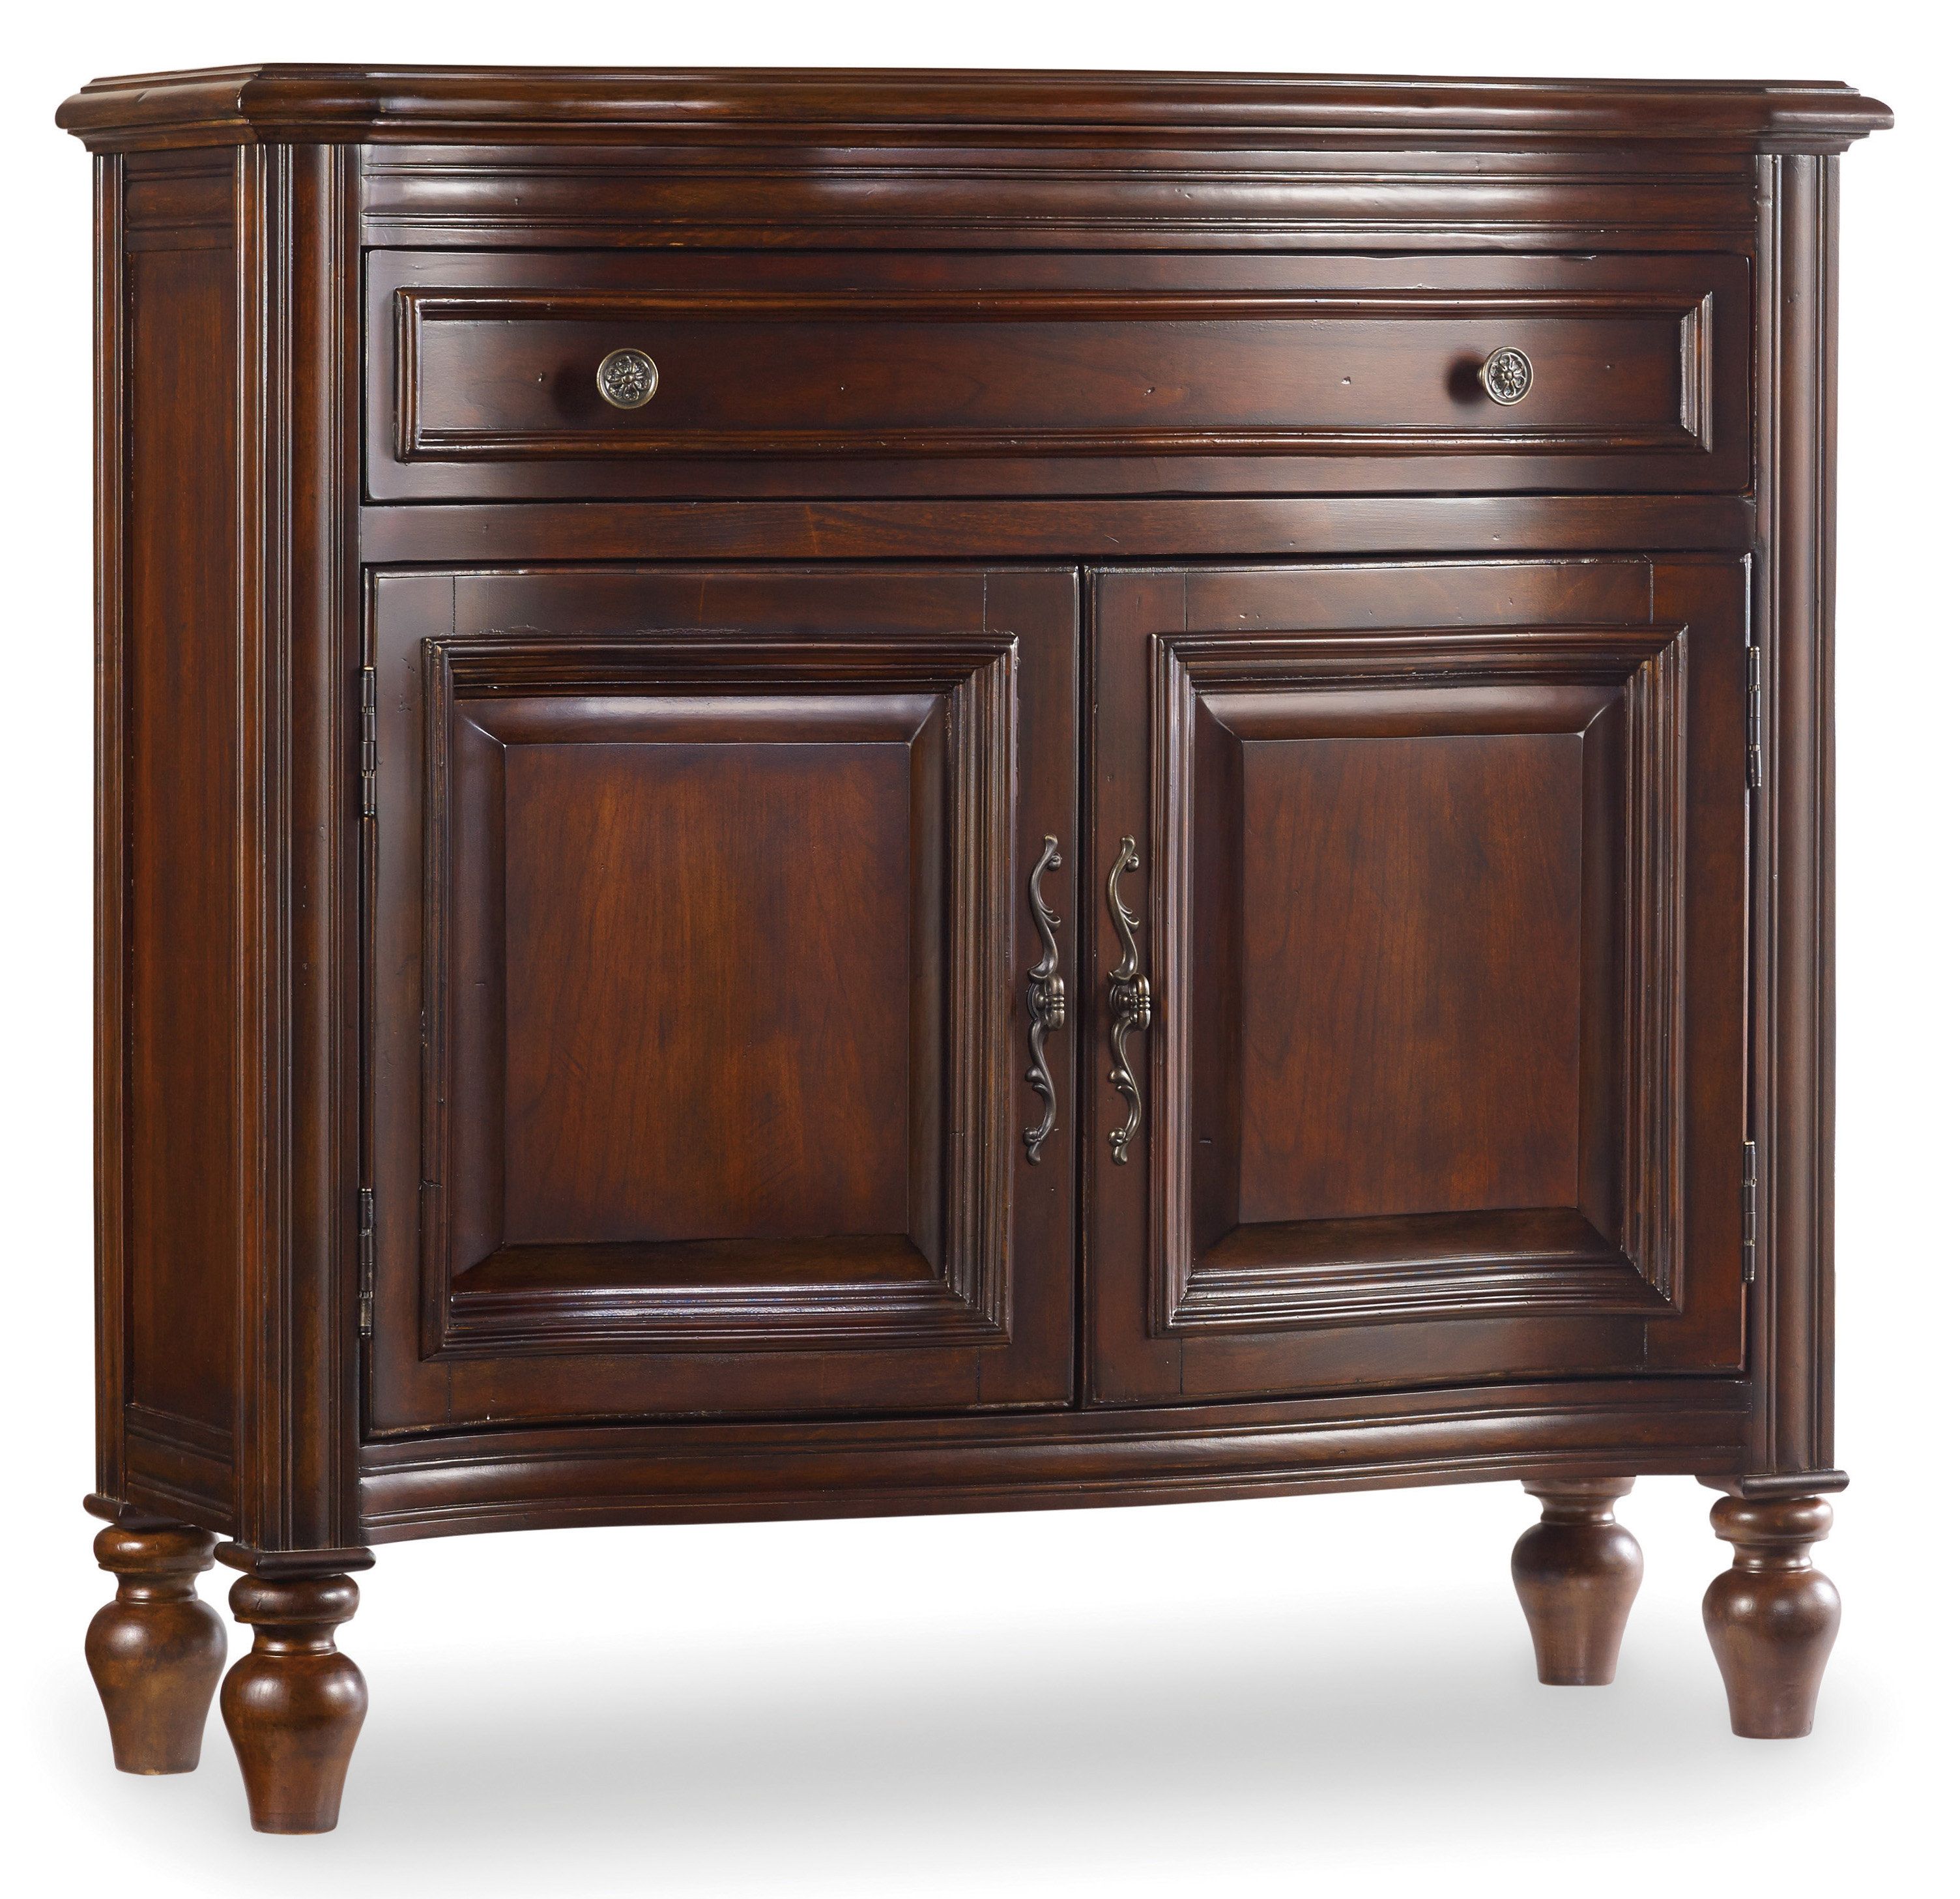 Hooker Furniture Solana Sideboard & Reviews | Wayfair In Solana Sideboards (View 9 of 30)